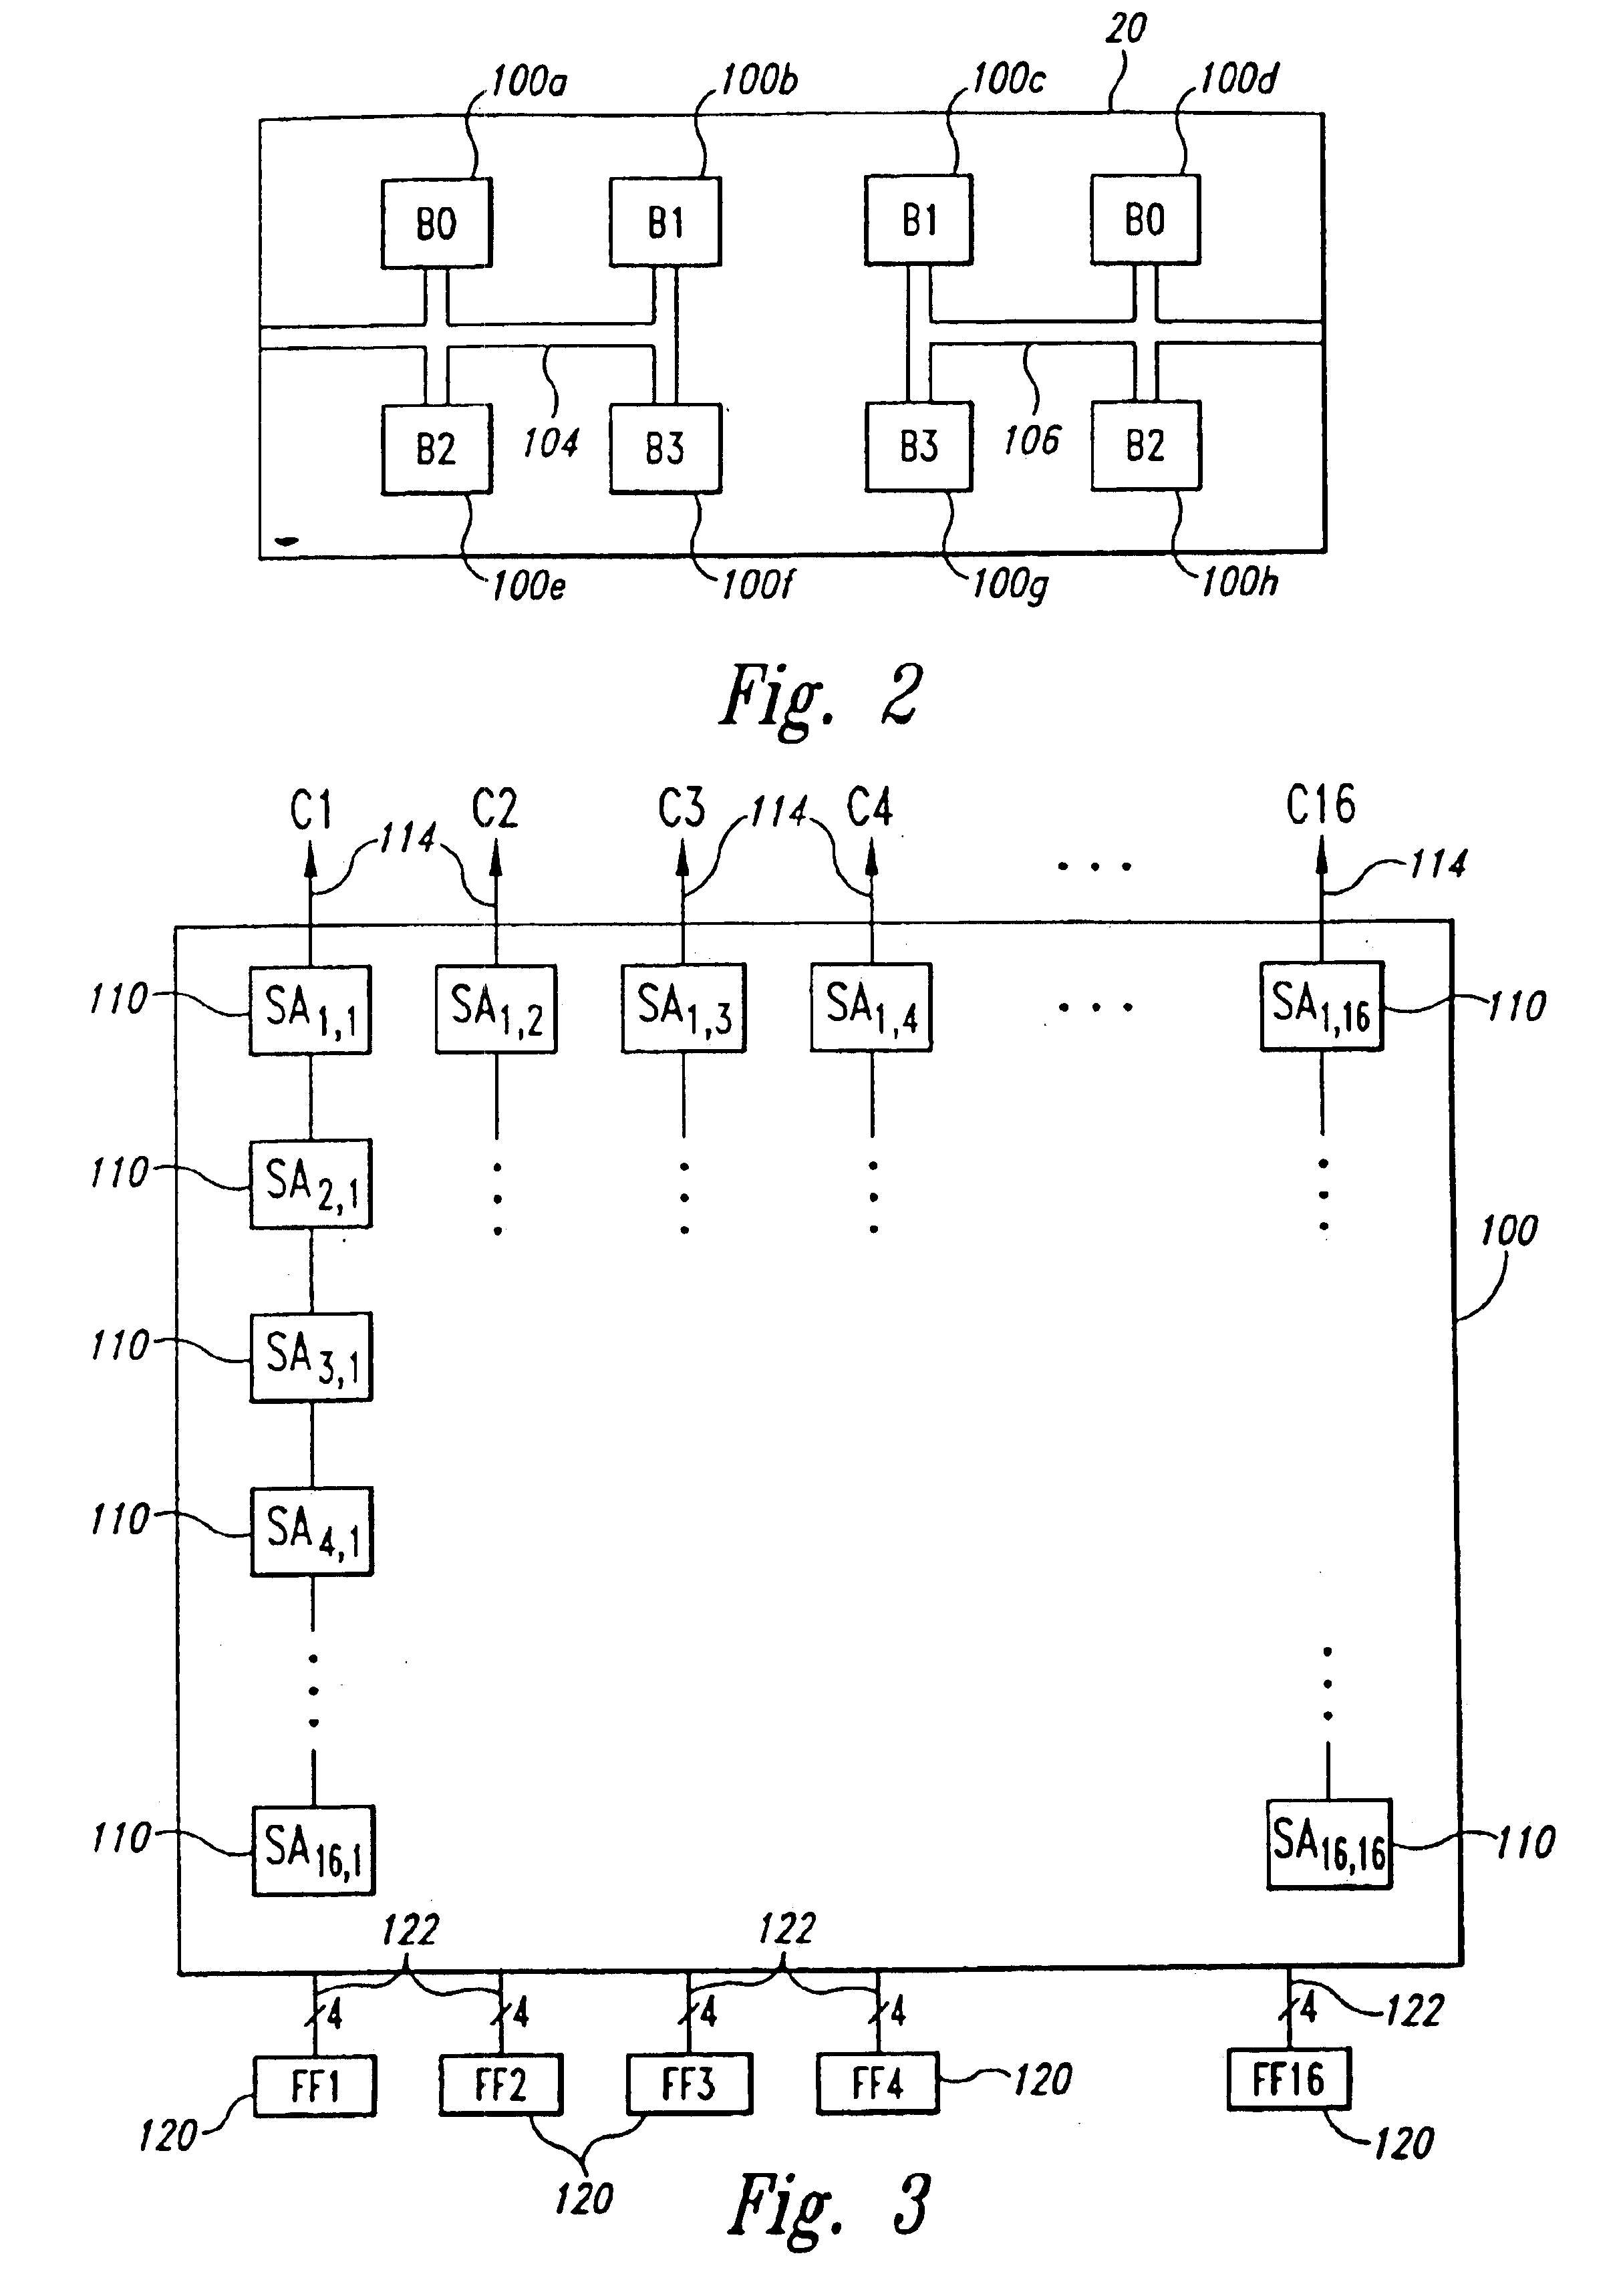 Memory device and method having data path with multiple prefetch I/O configurations